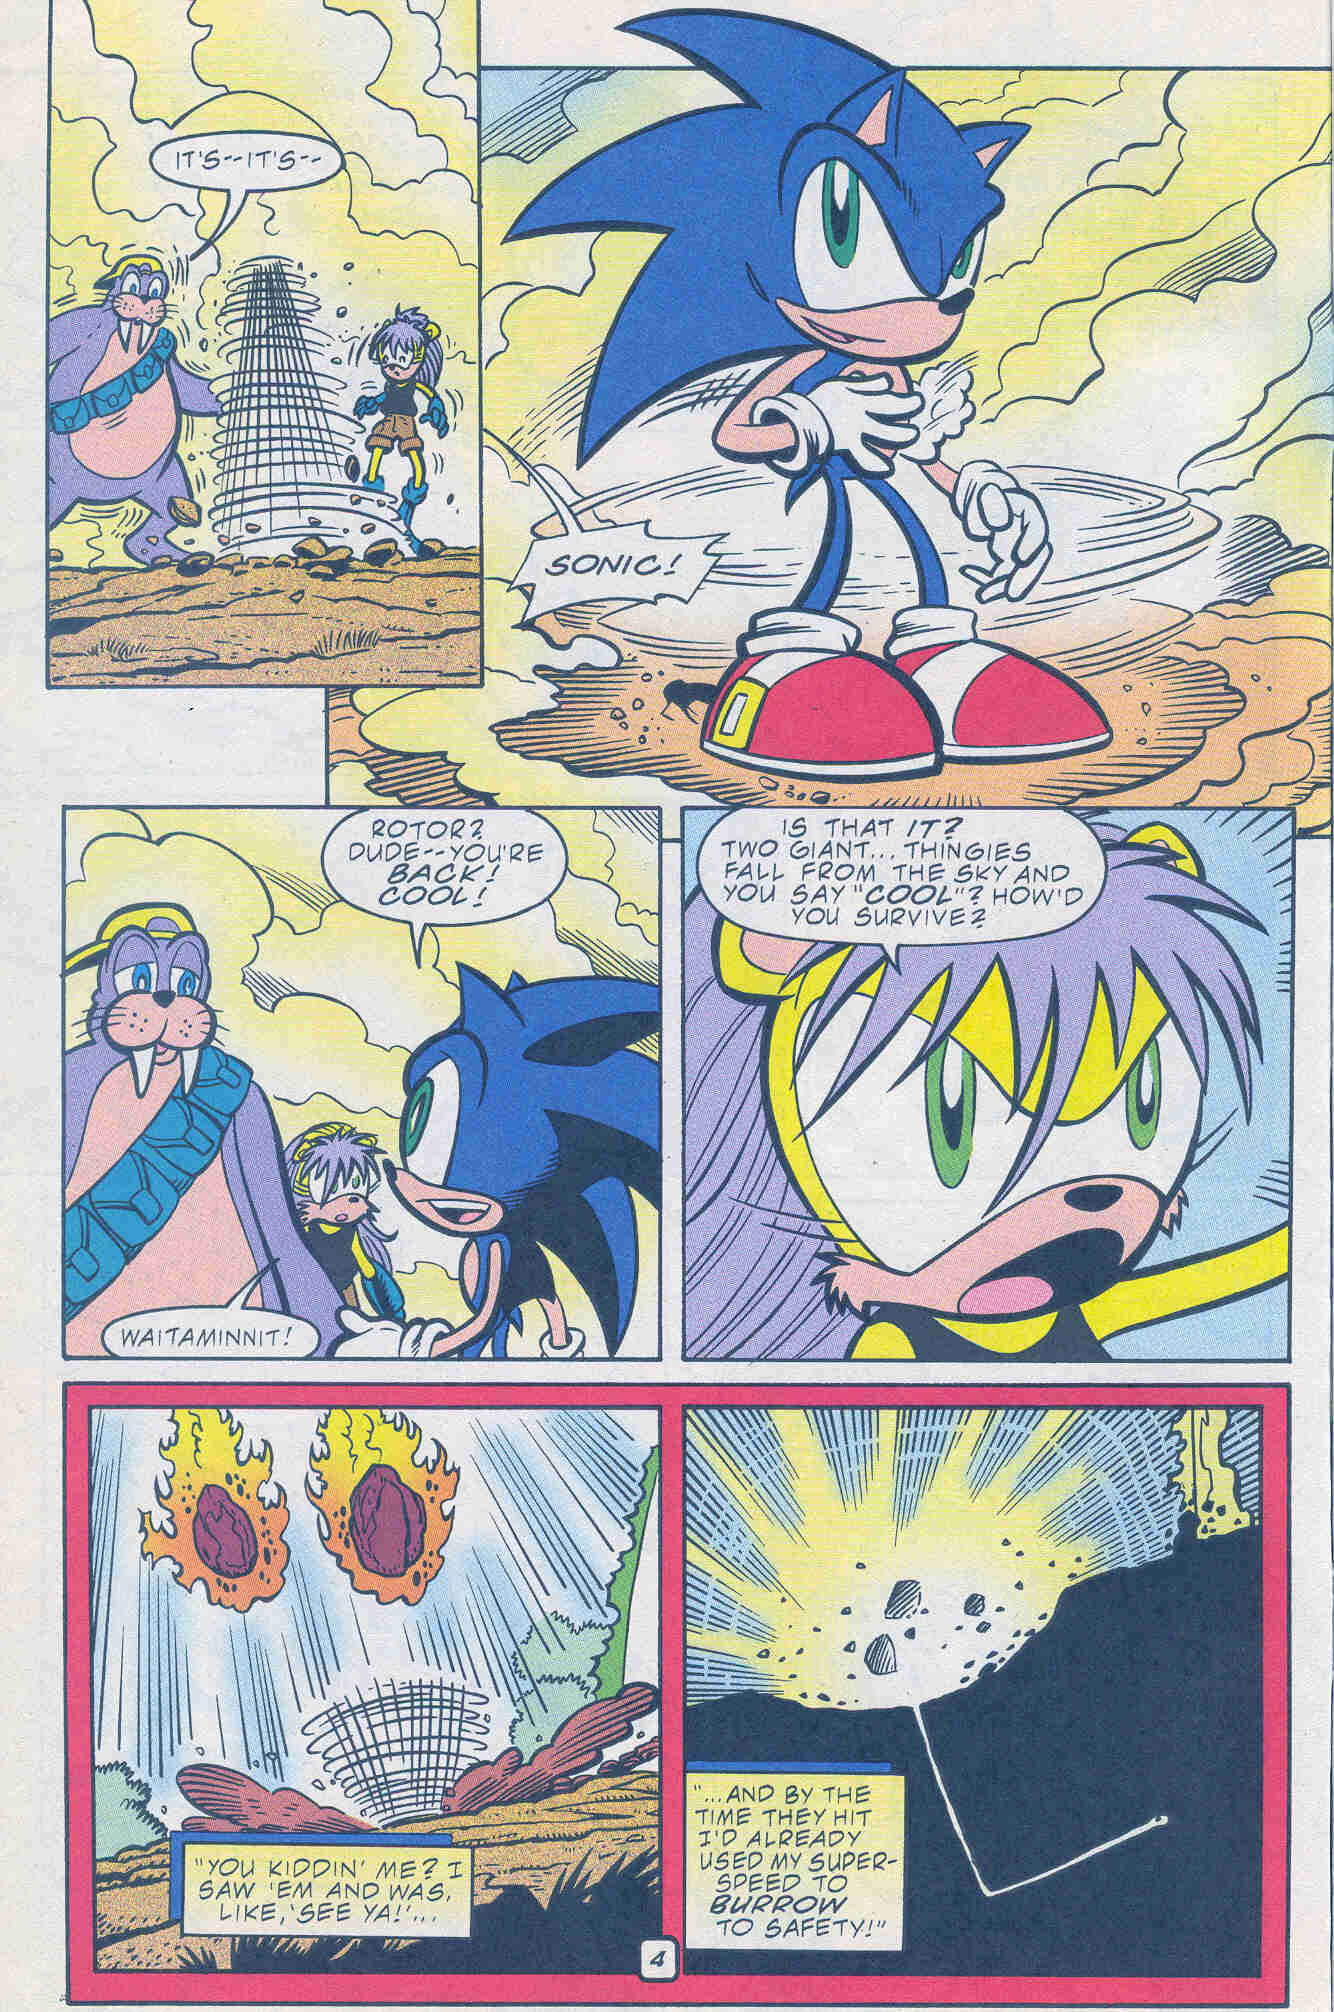 Sonic - Archie Adventure Series February 2001 Page 04